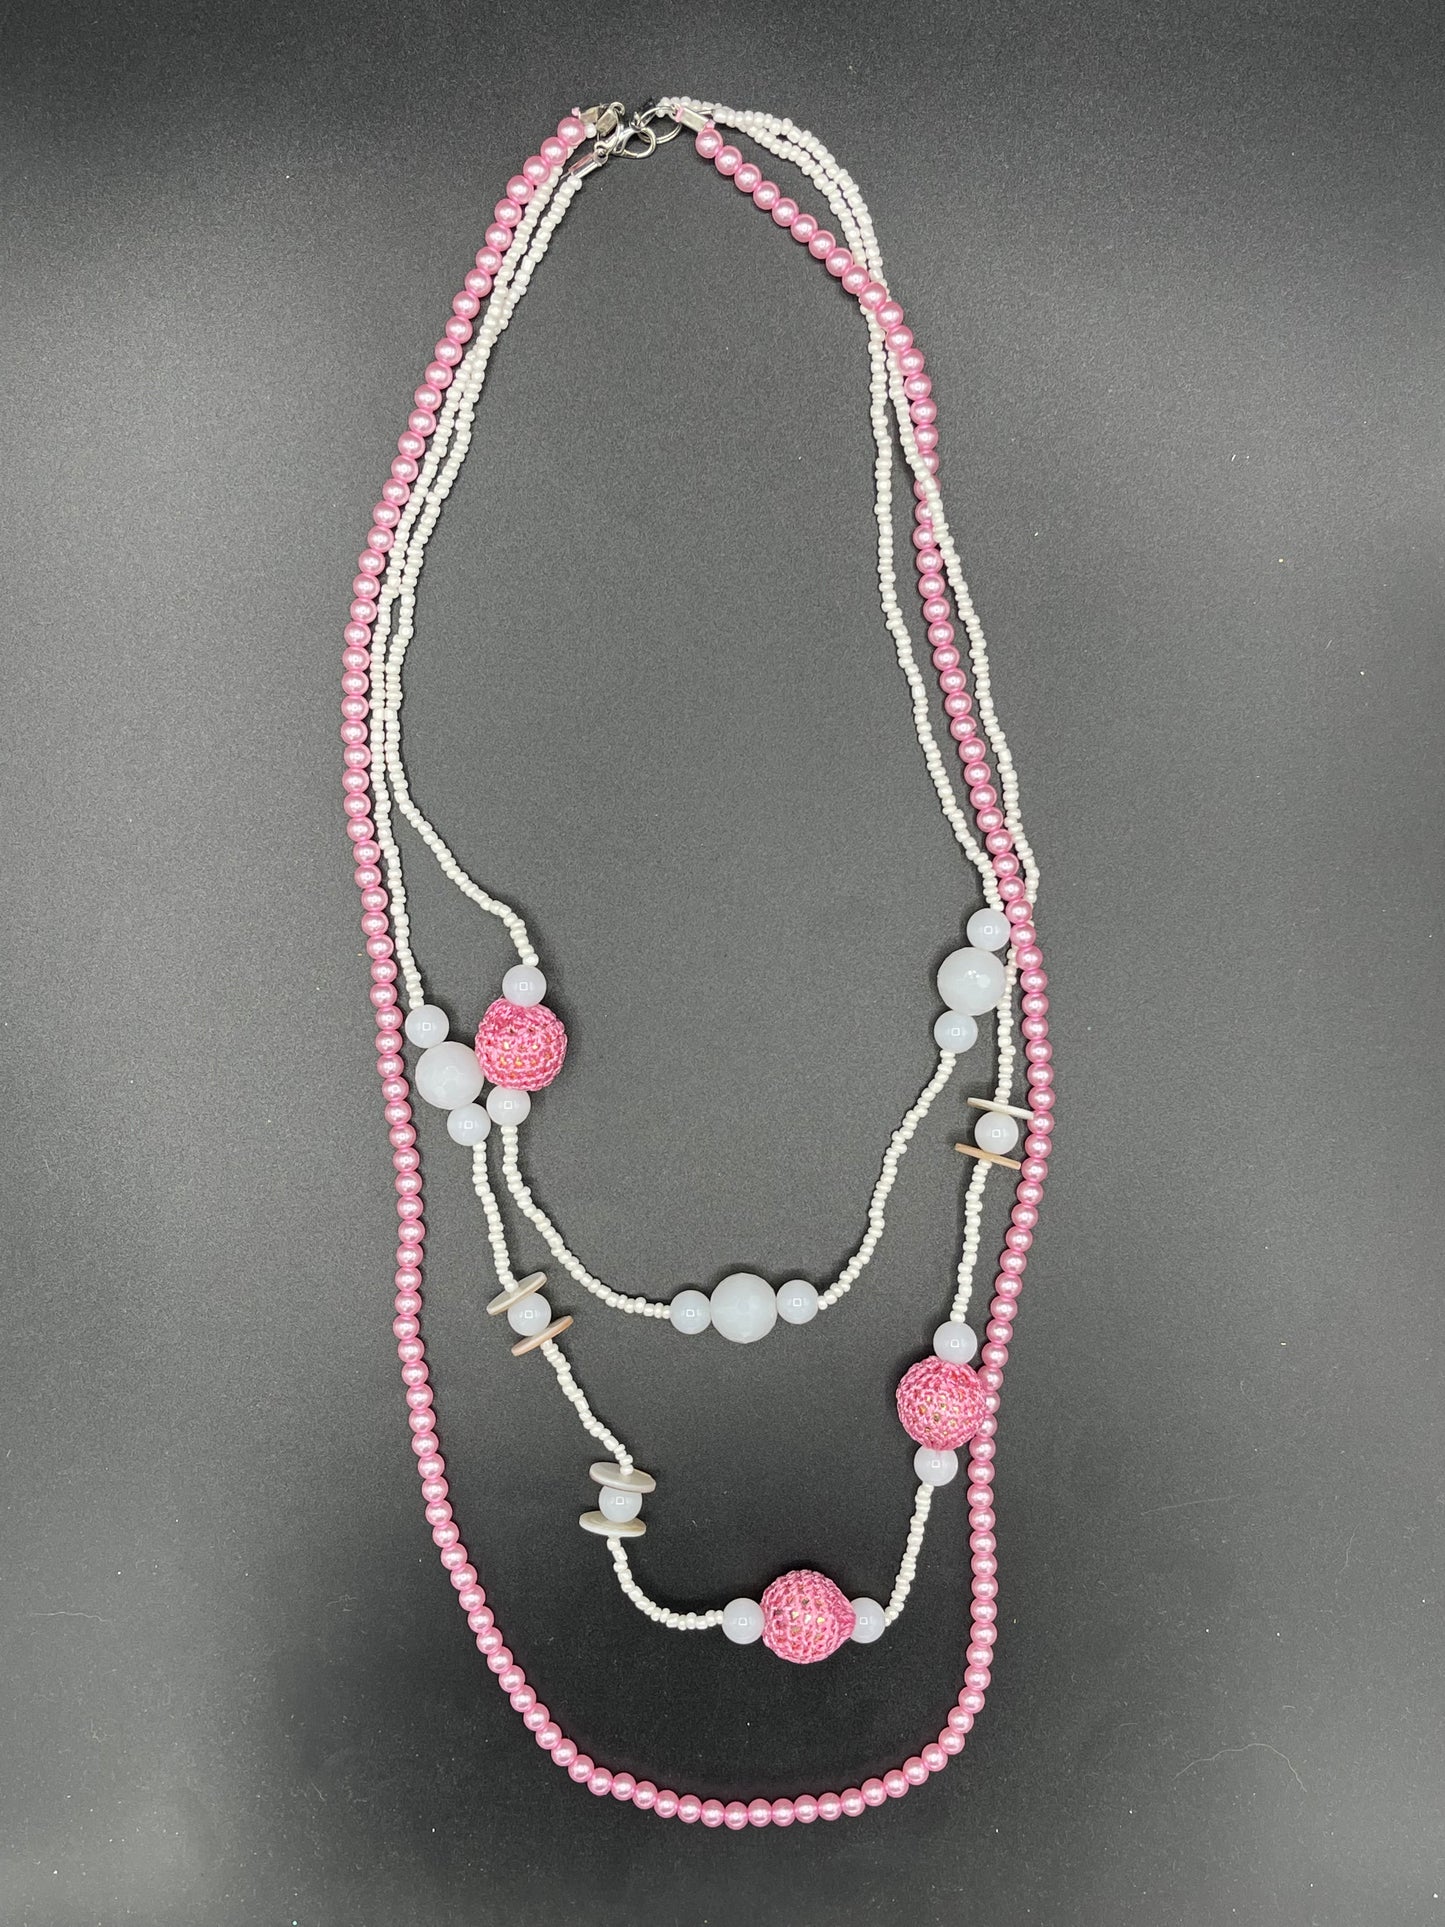 "Simply Pink and White" Necklace